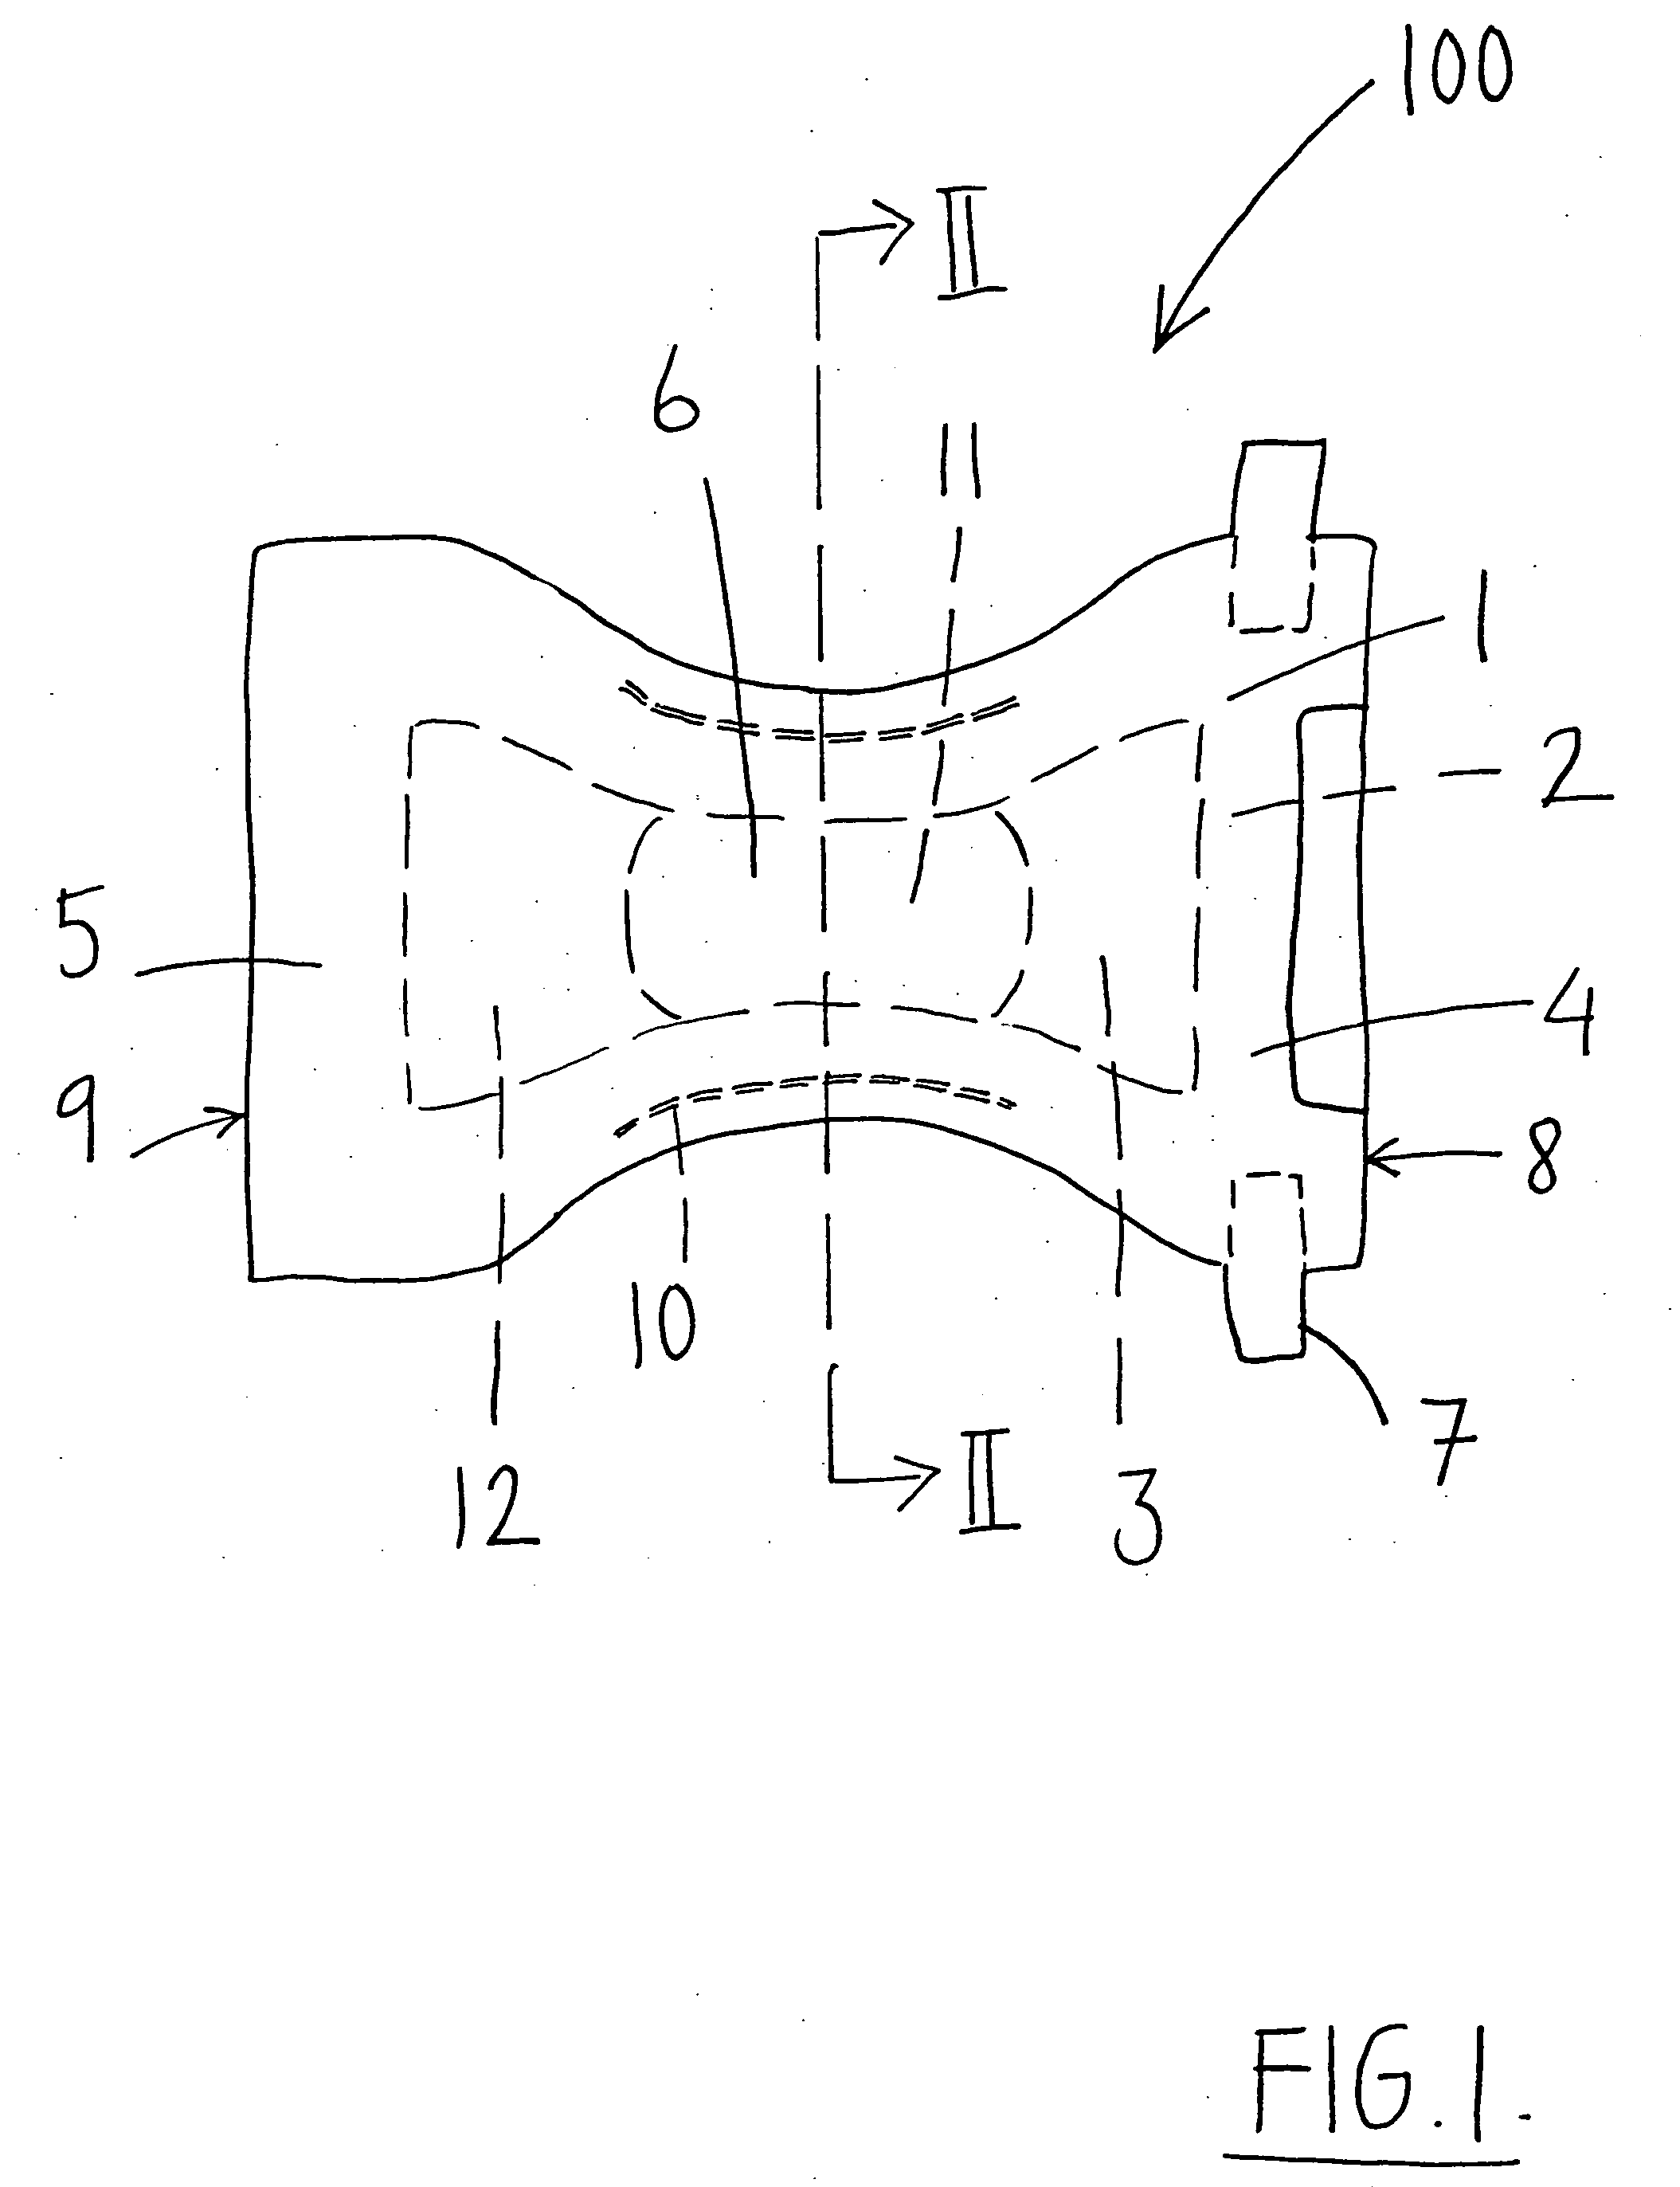 Absorbent article comprising an absorbent structure